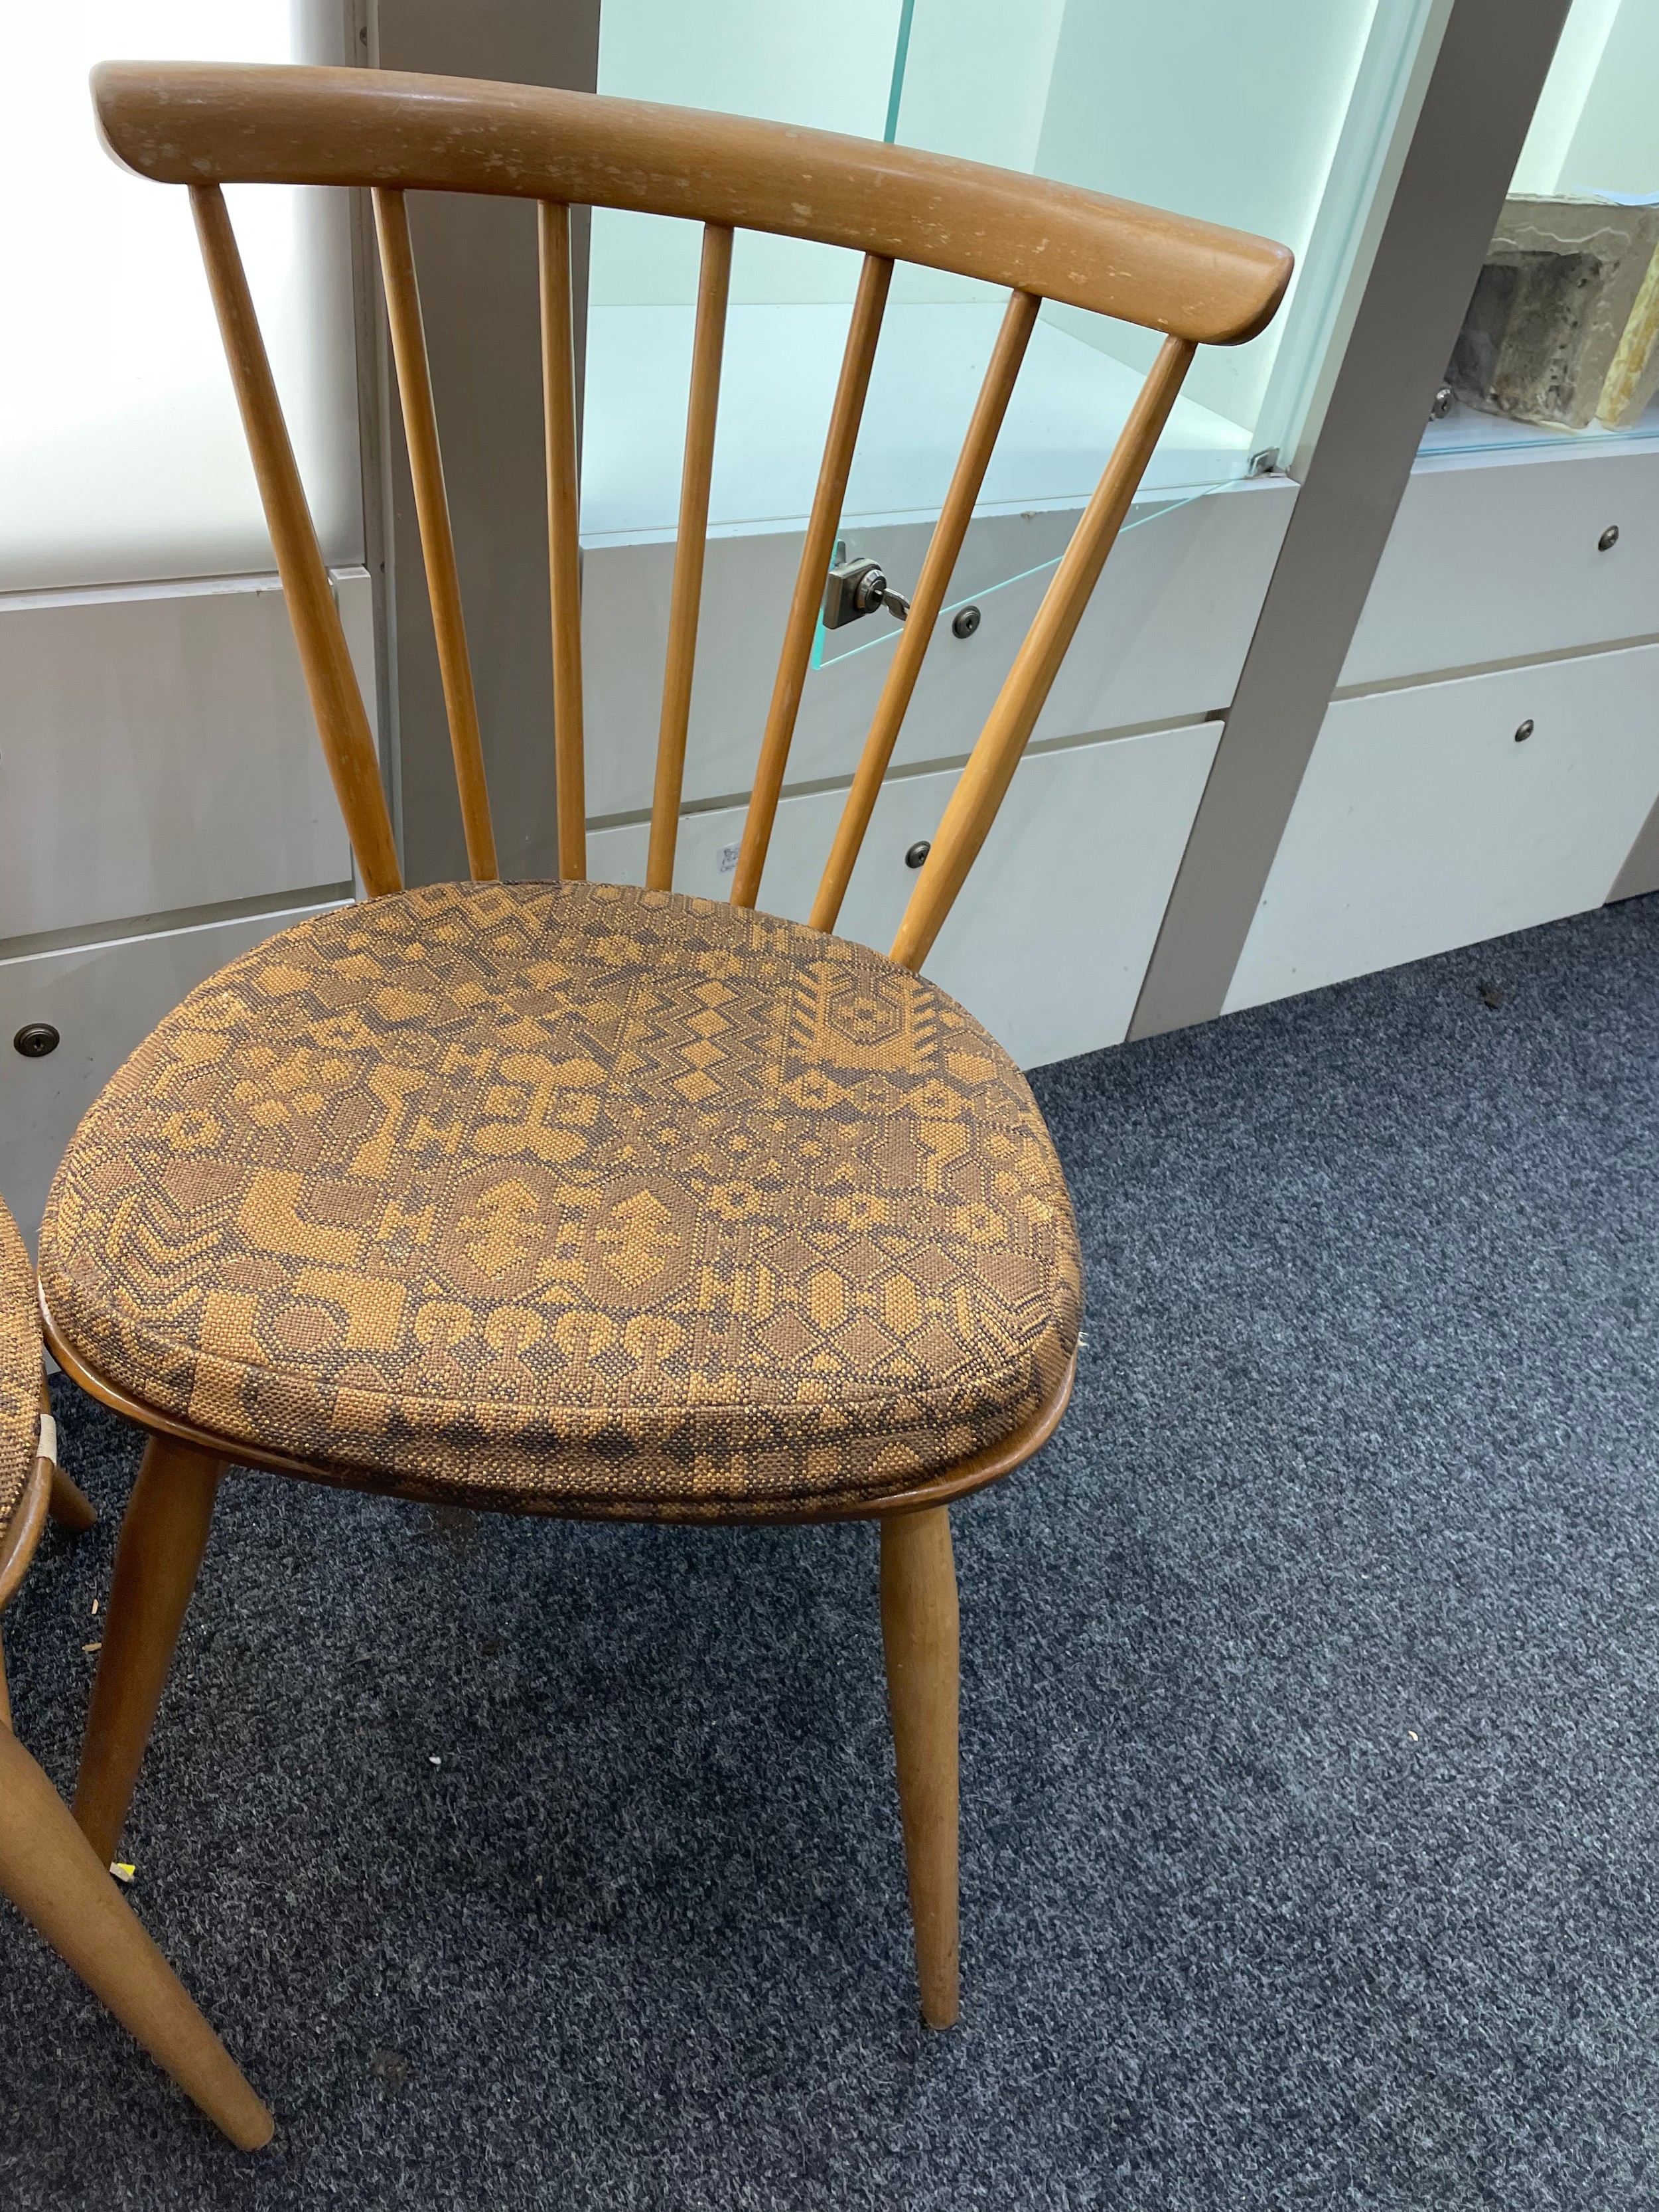 3 Ercol mid century stick back chairs with original stickers - Image 2 of 4